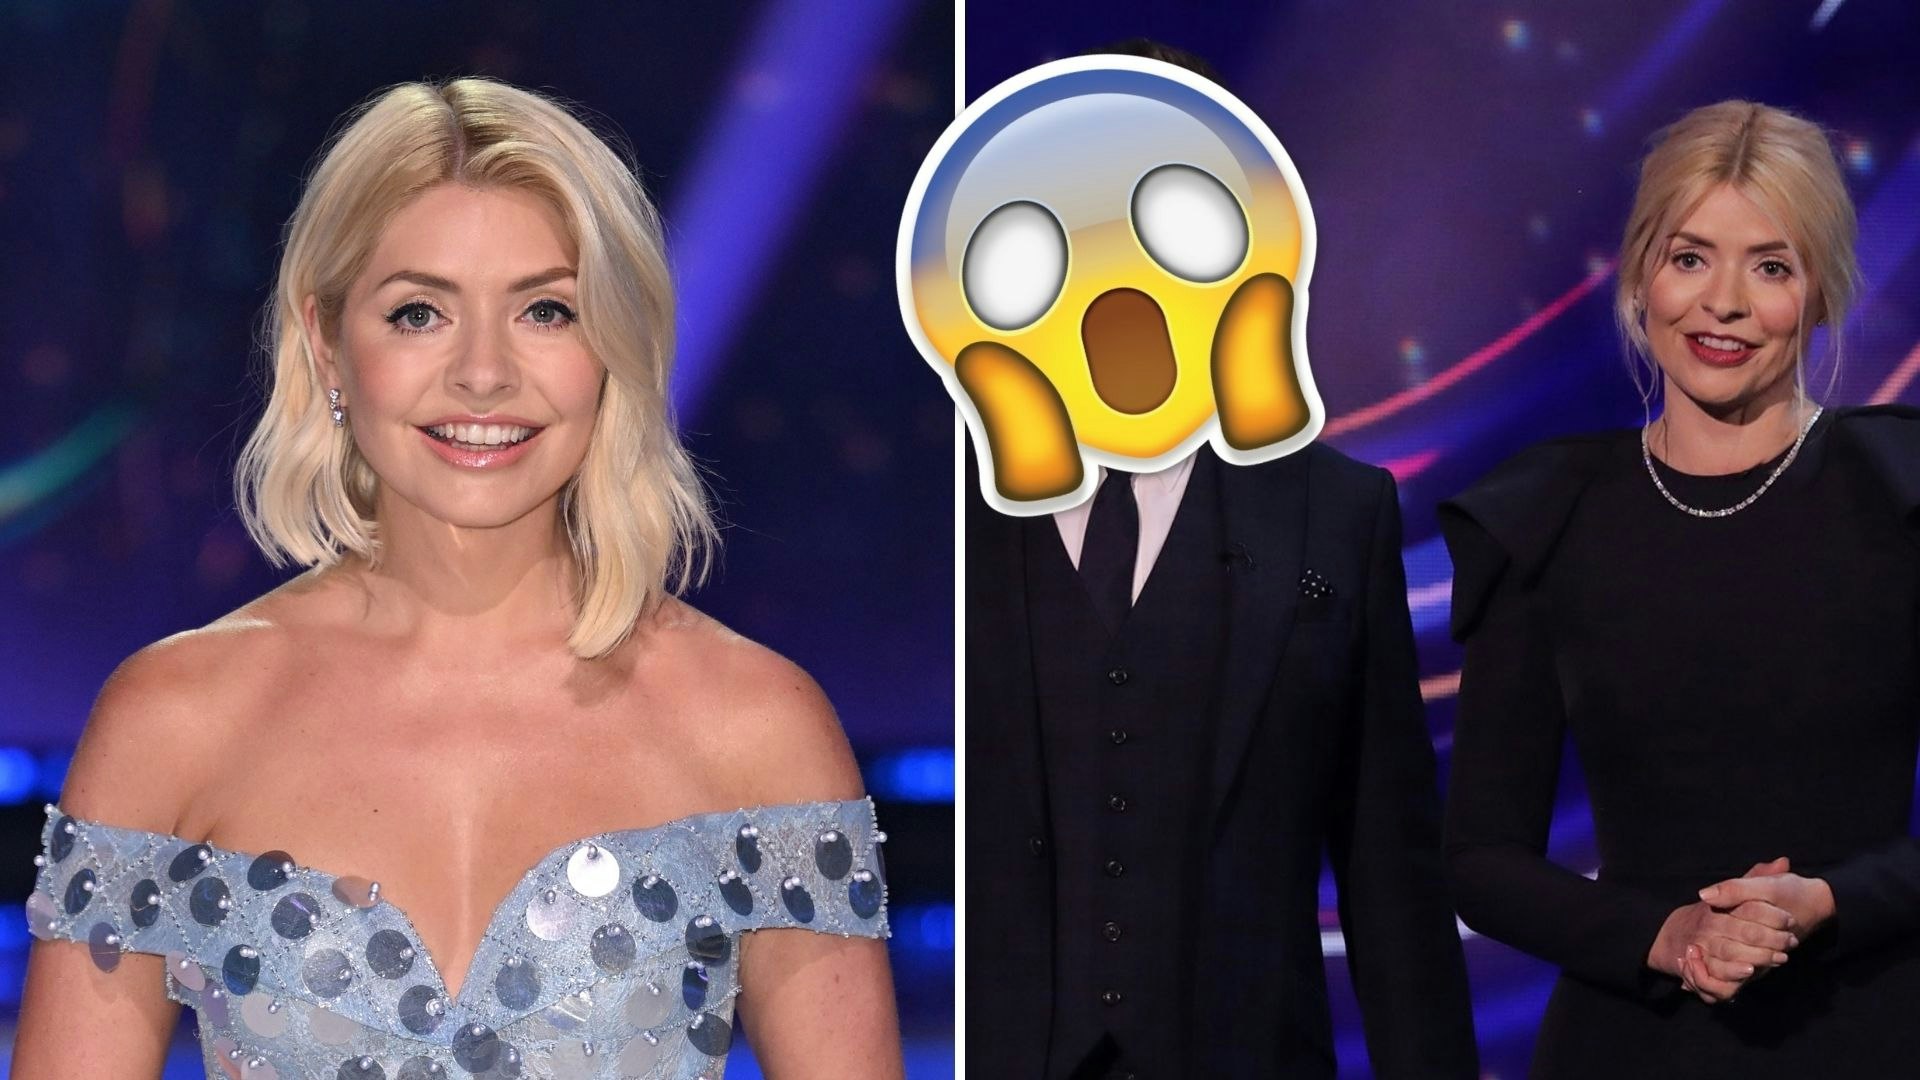 Holly Willoughby to return to Dancing on Ice and she has a new co-host